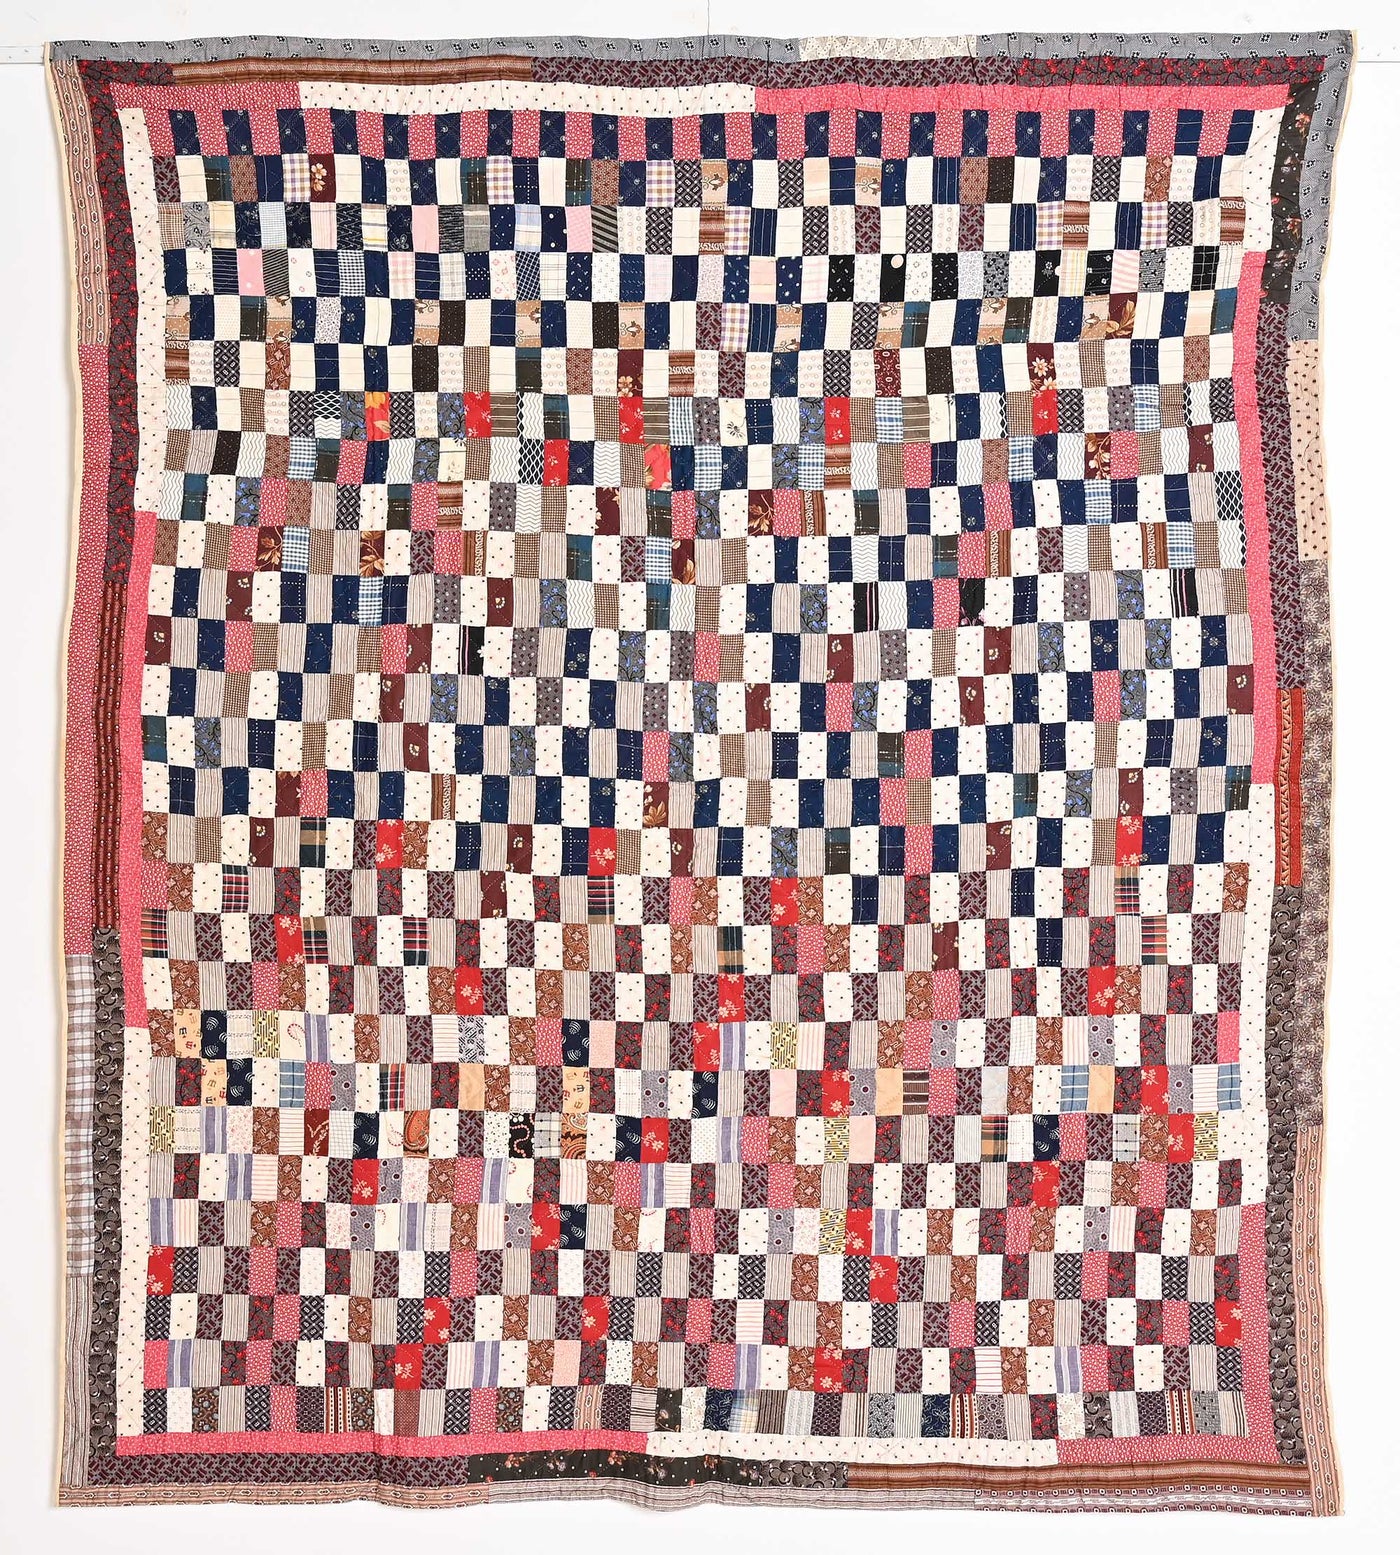 19th Century Calico One Patch Rectangles Quilt from Pennsylvania measuring 64" x 70".